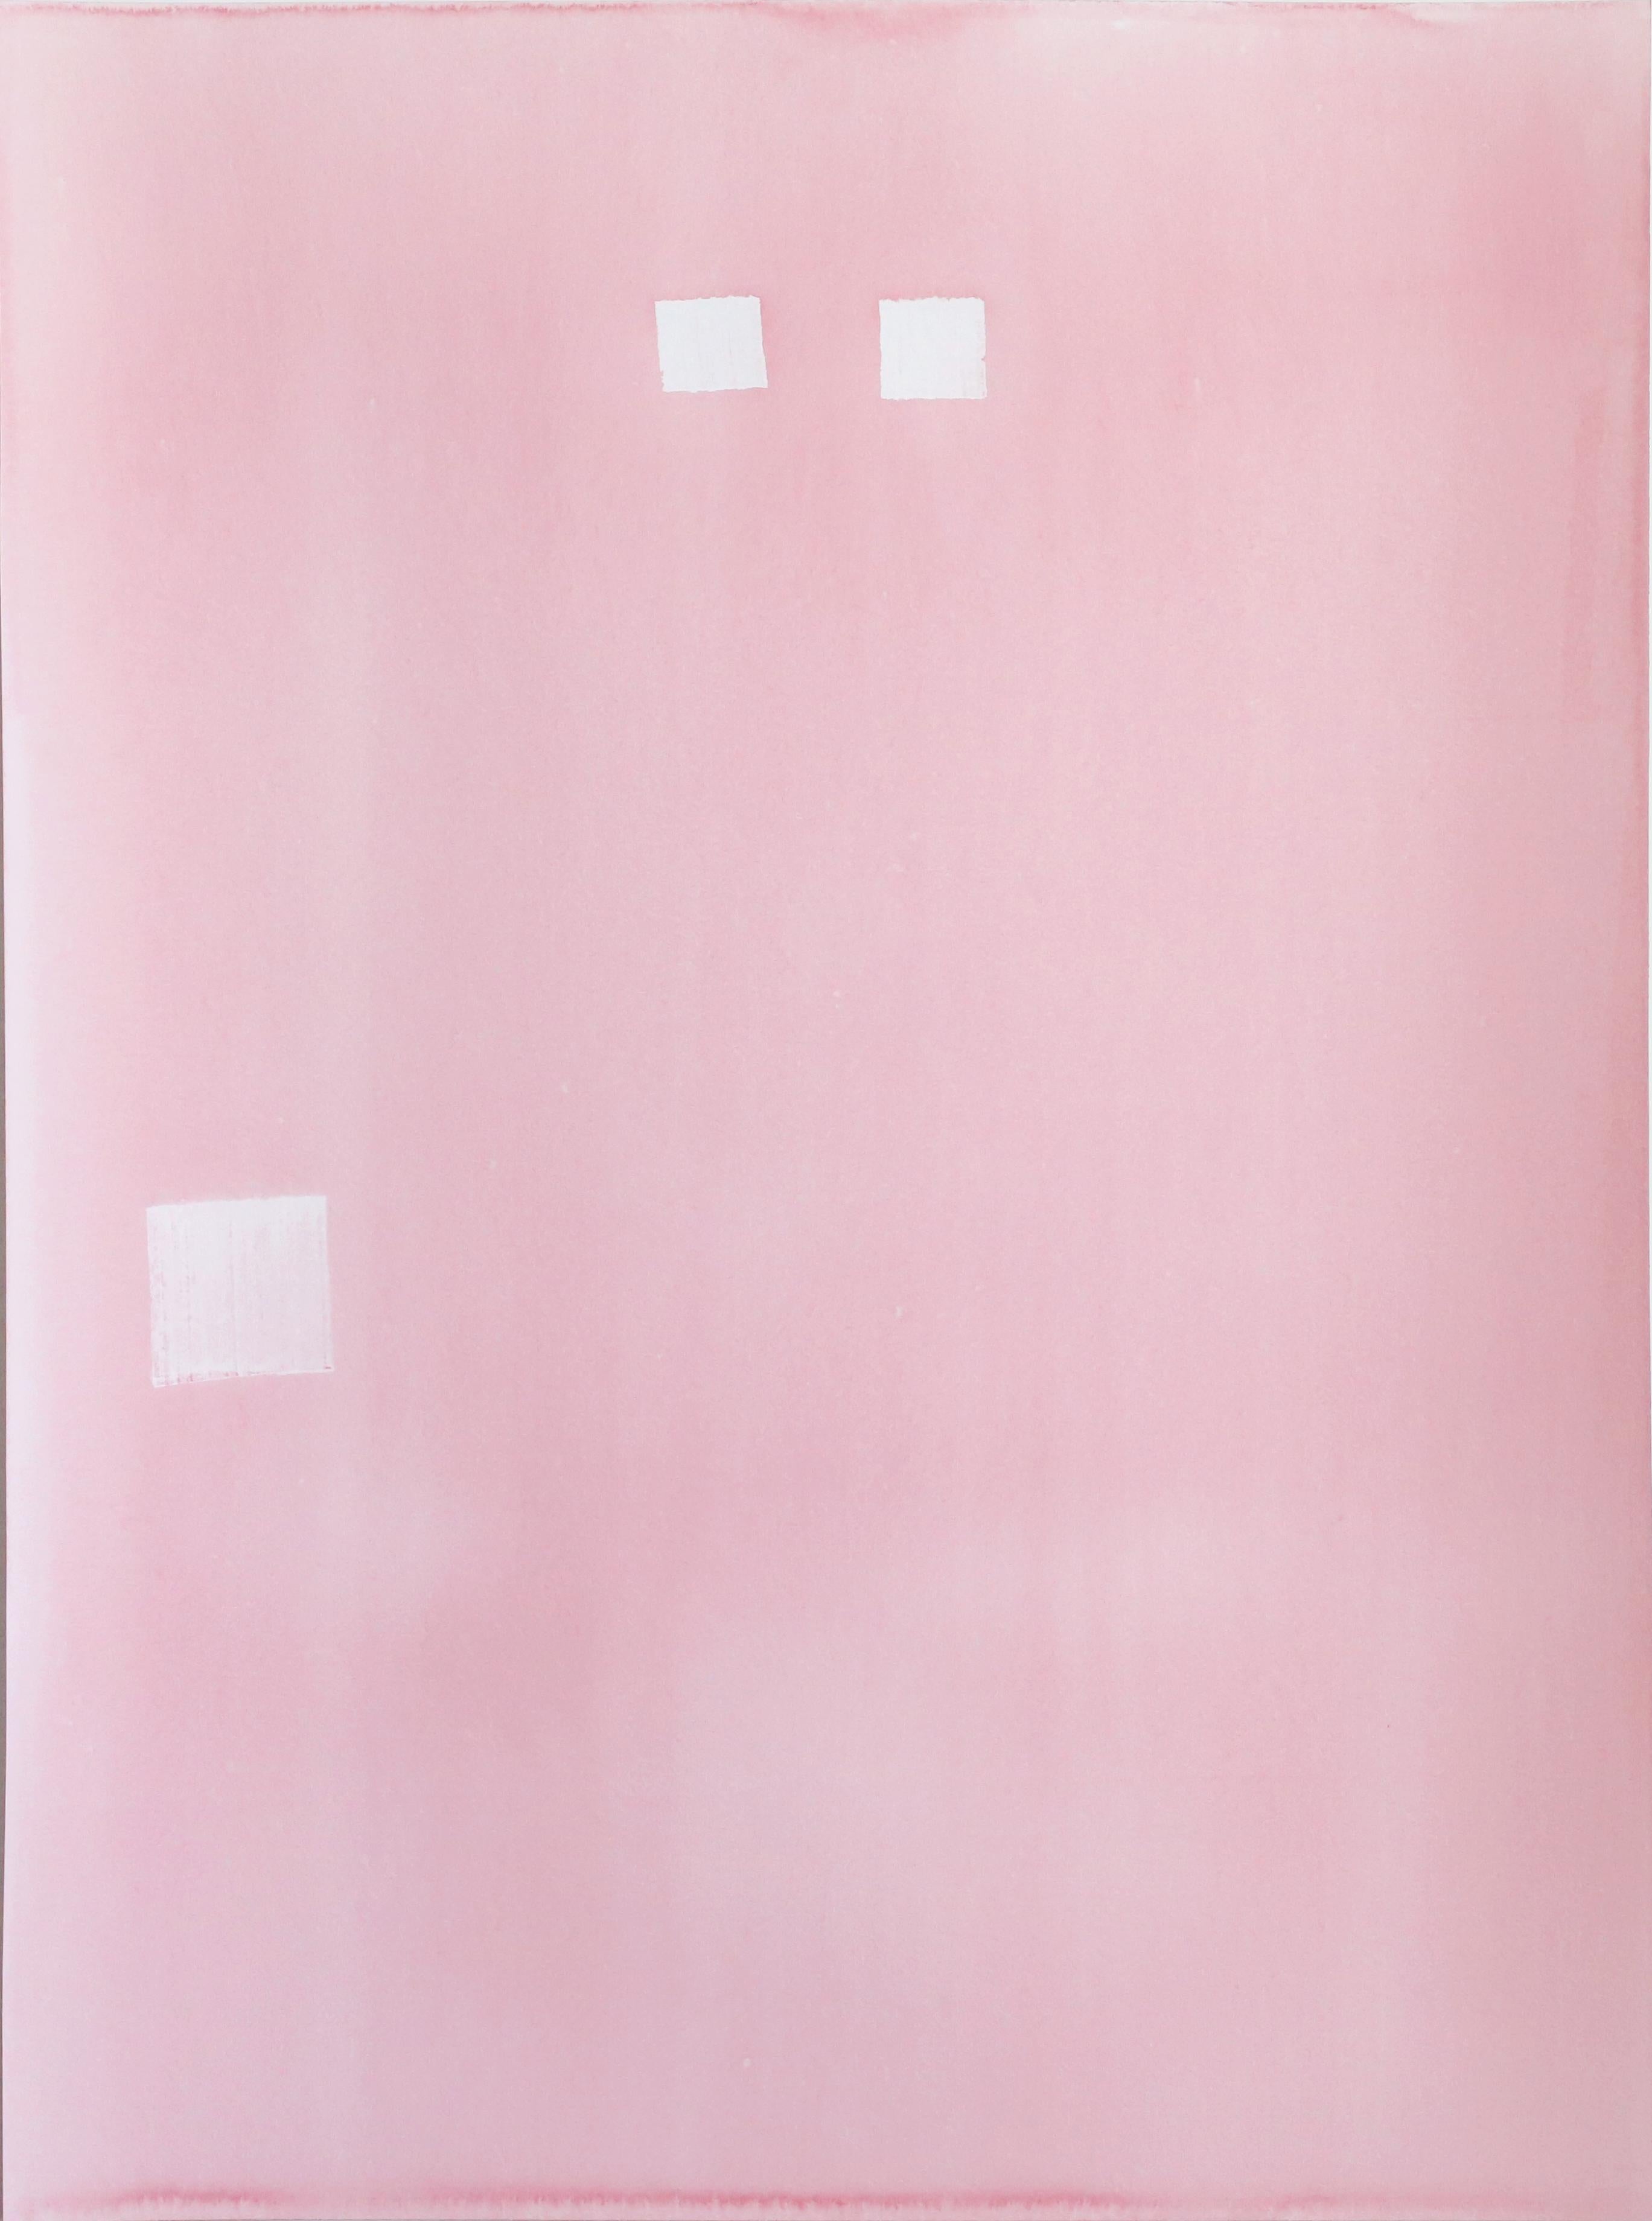 Contemporary watercolor on paper drawing GJ Kimsunken 'Untitled' pink minimal 1